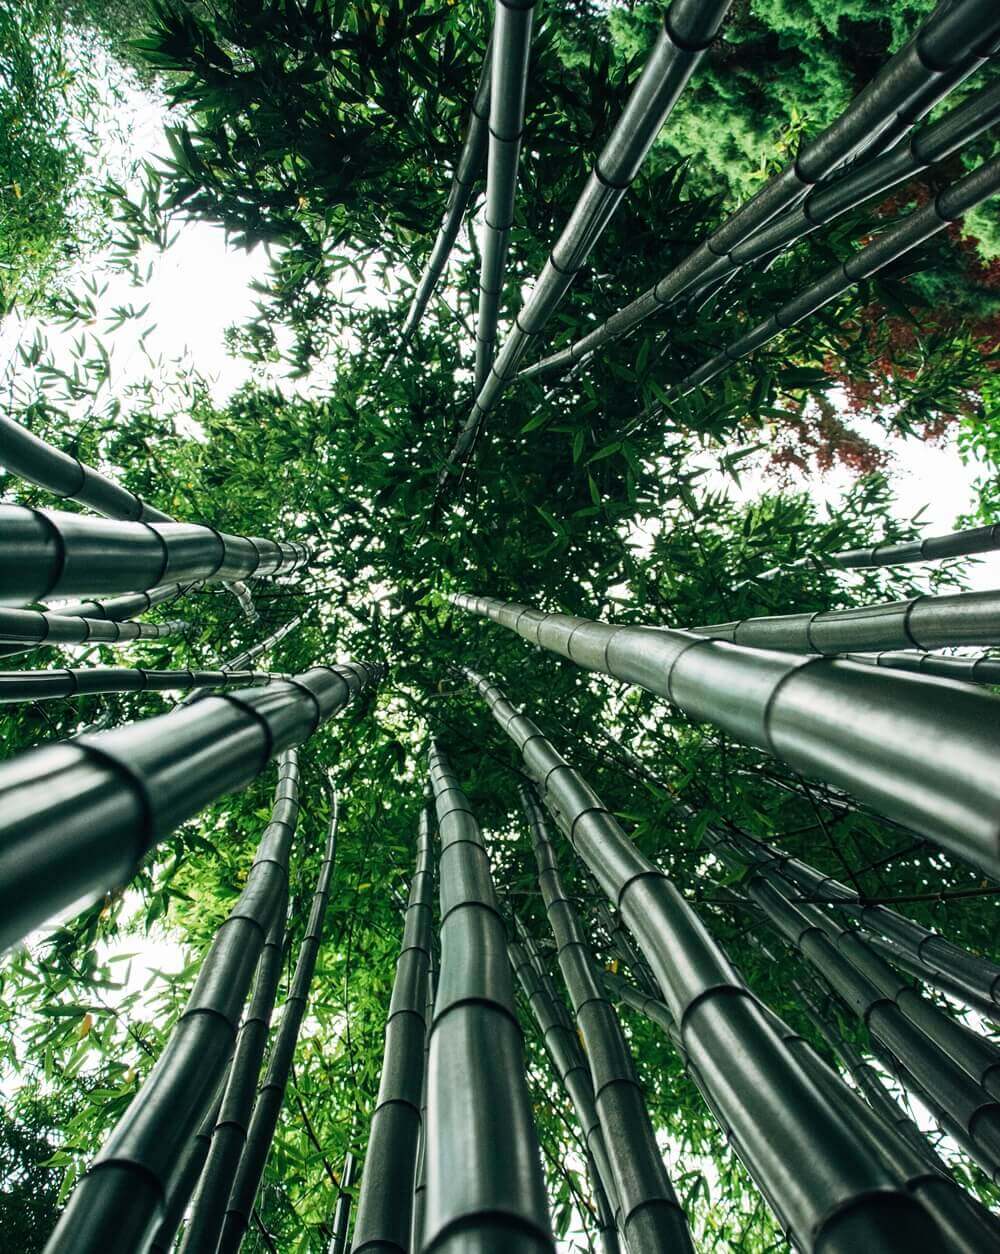 Towering bamboo stalks reach towards the sky, creating a dense green canopy